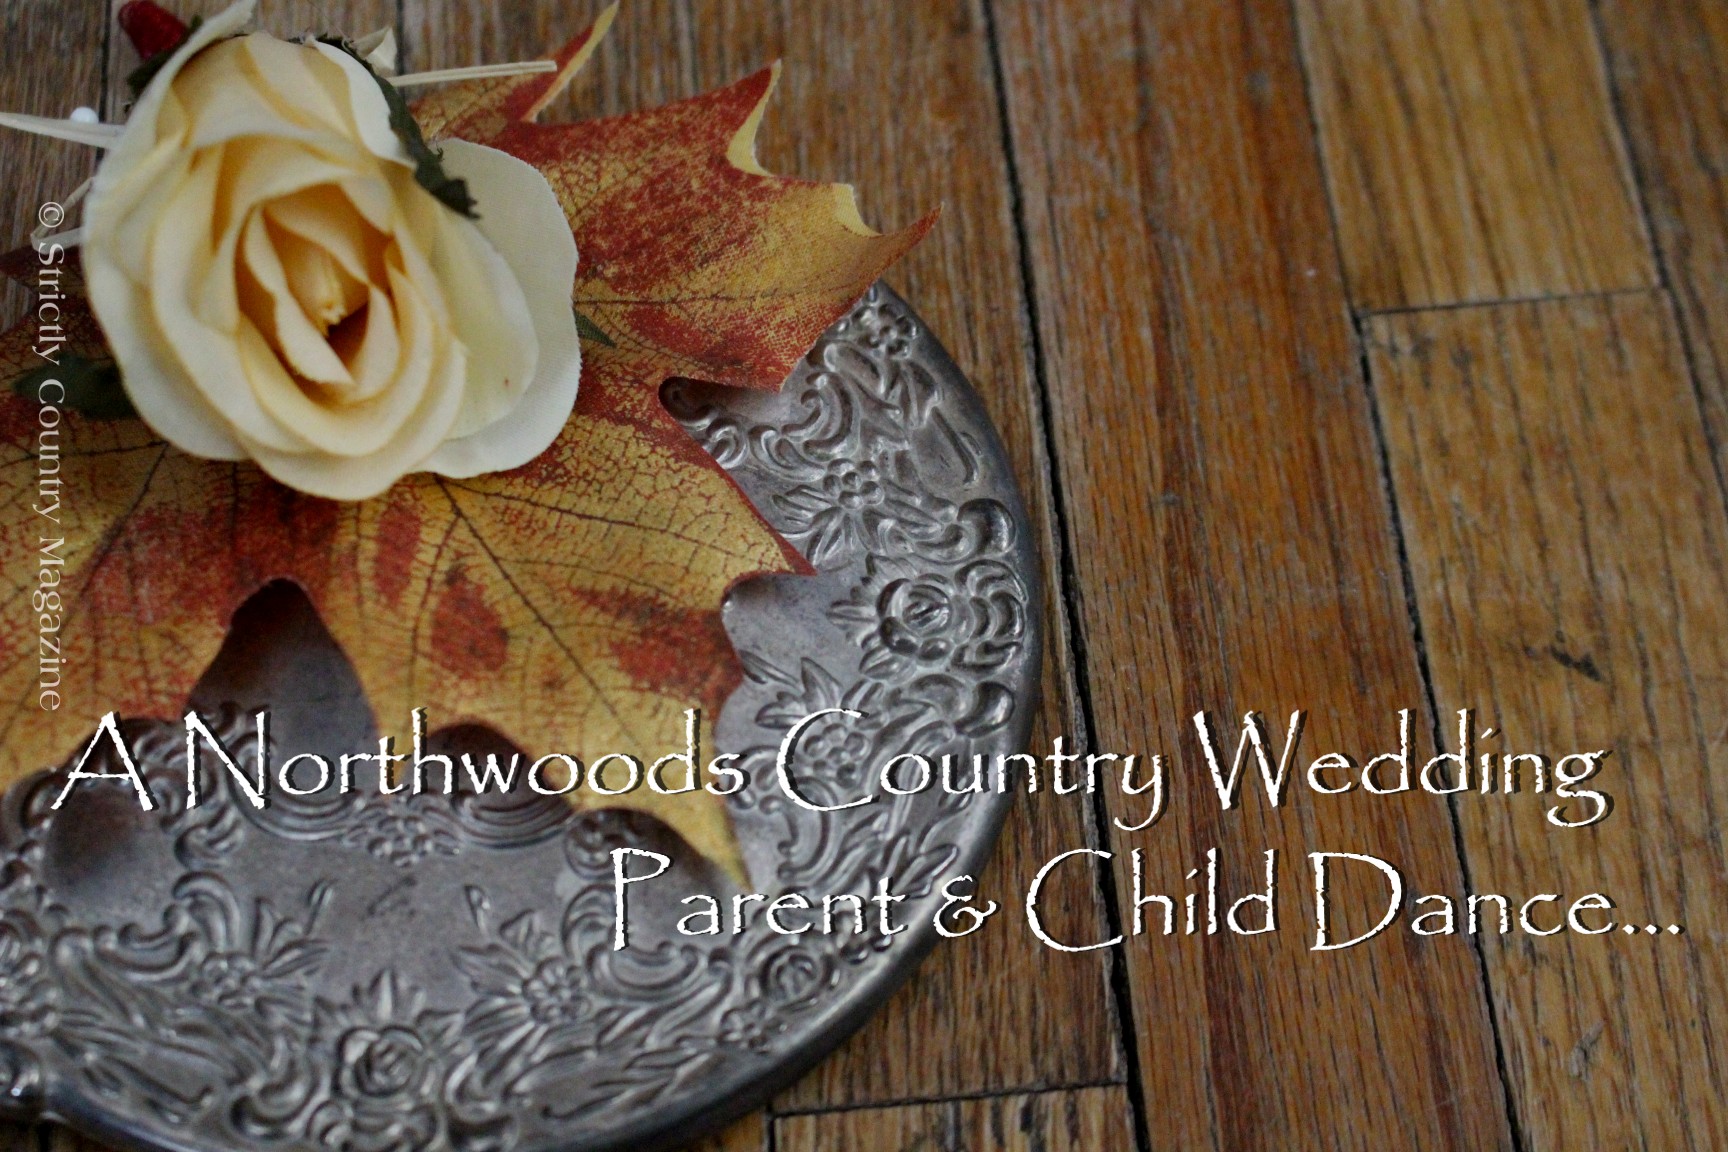 Strictly Country copyright A Northwoods Country Wedding Parent Child Dance